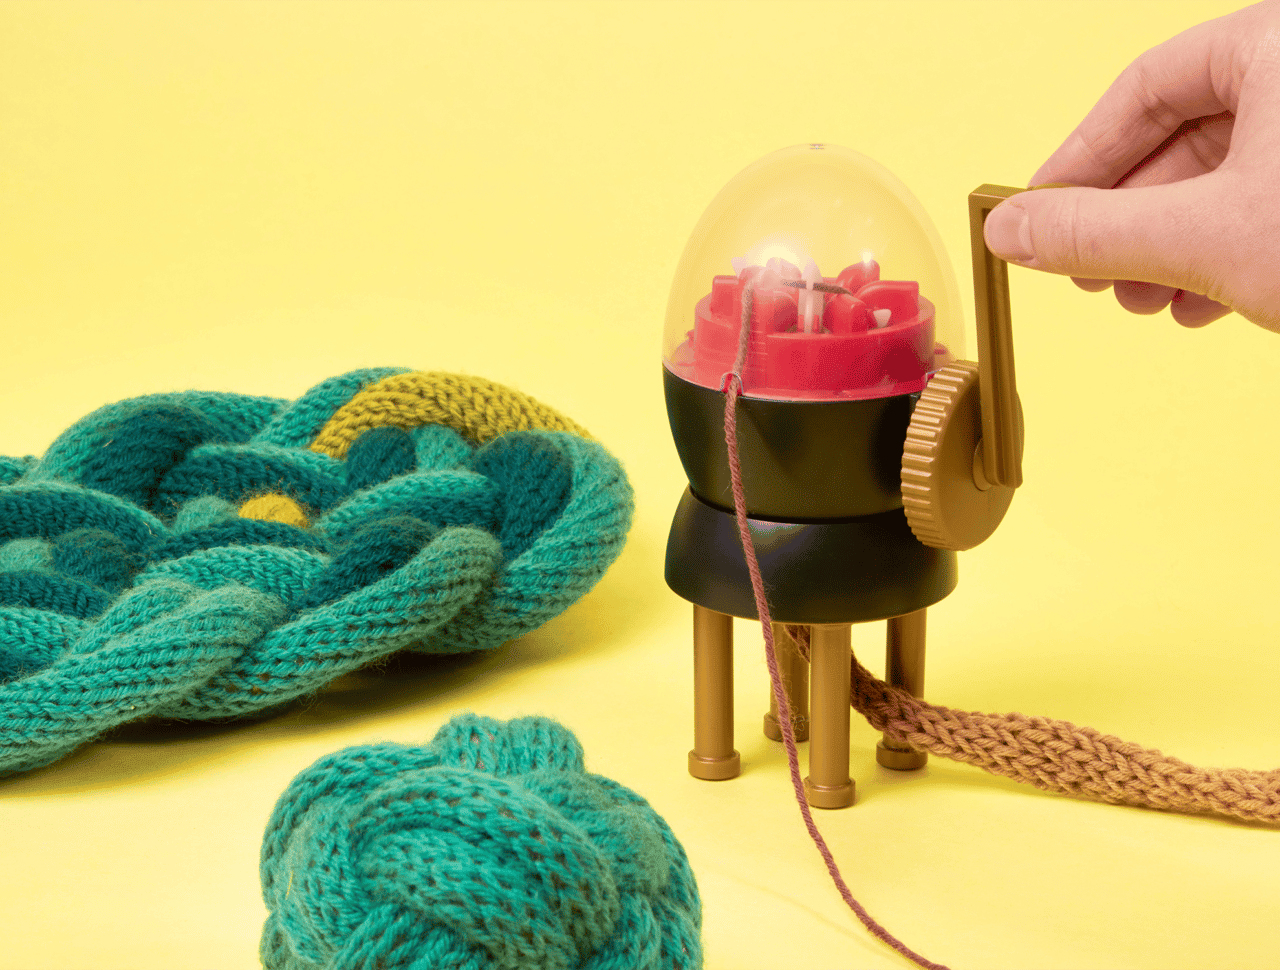 Do's and don'ts for the Addi Egg -   Knitting machine projects,  Addi knitting machine, Circular knitting machine